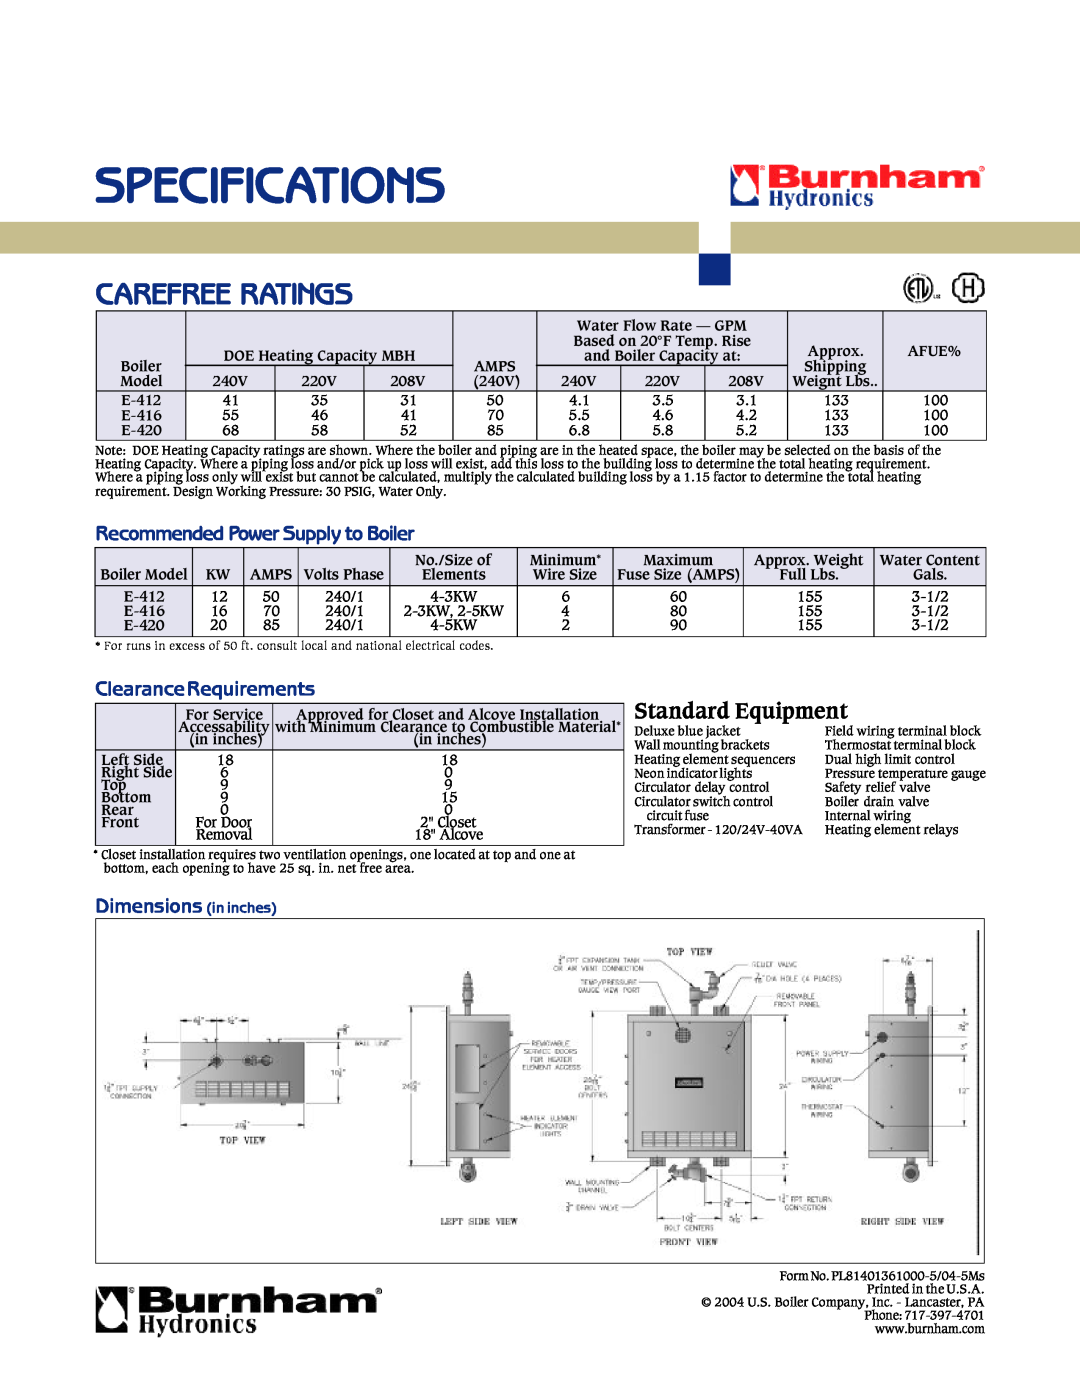 Burnham DOE warranty Specifications, Carefree Ratings, Recommended Power Supply to Boiler, Clearance Requirements 